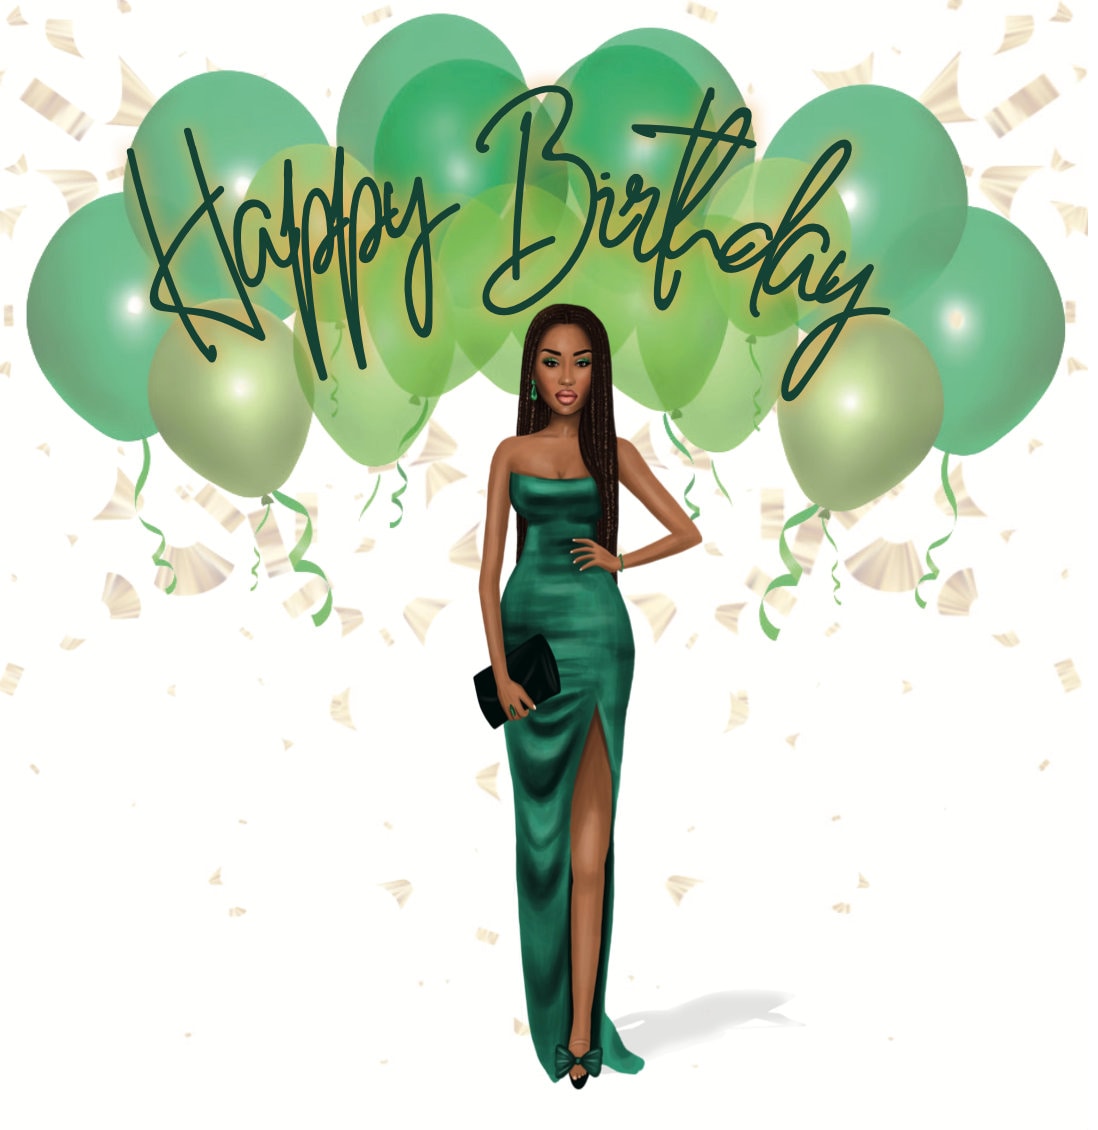 Open Happy Birthday Card Wishing You A Very Artistic Lady Green Dress